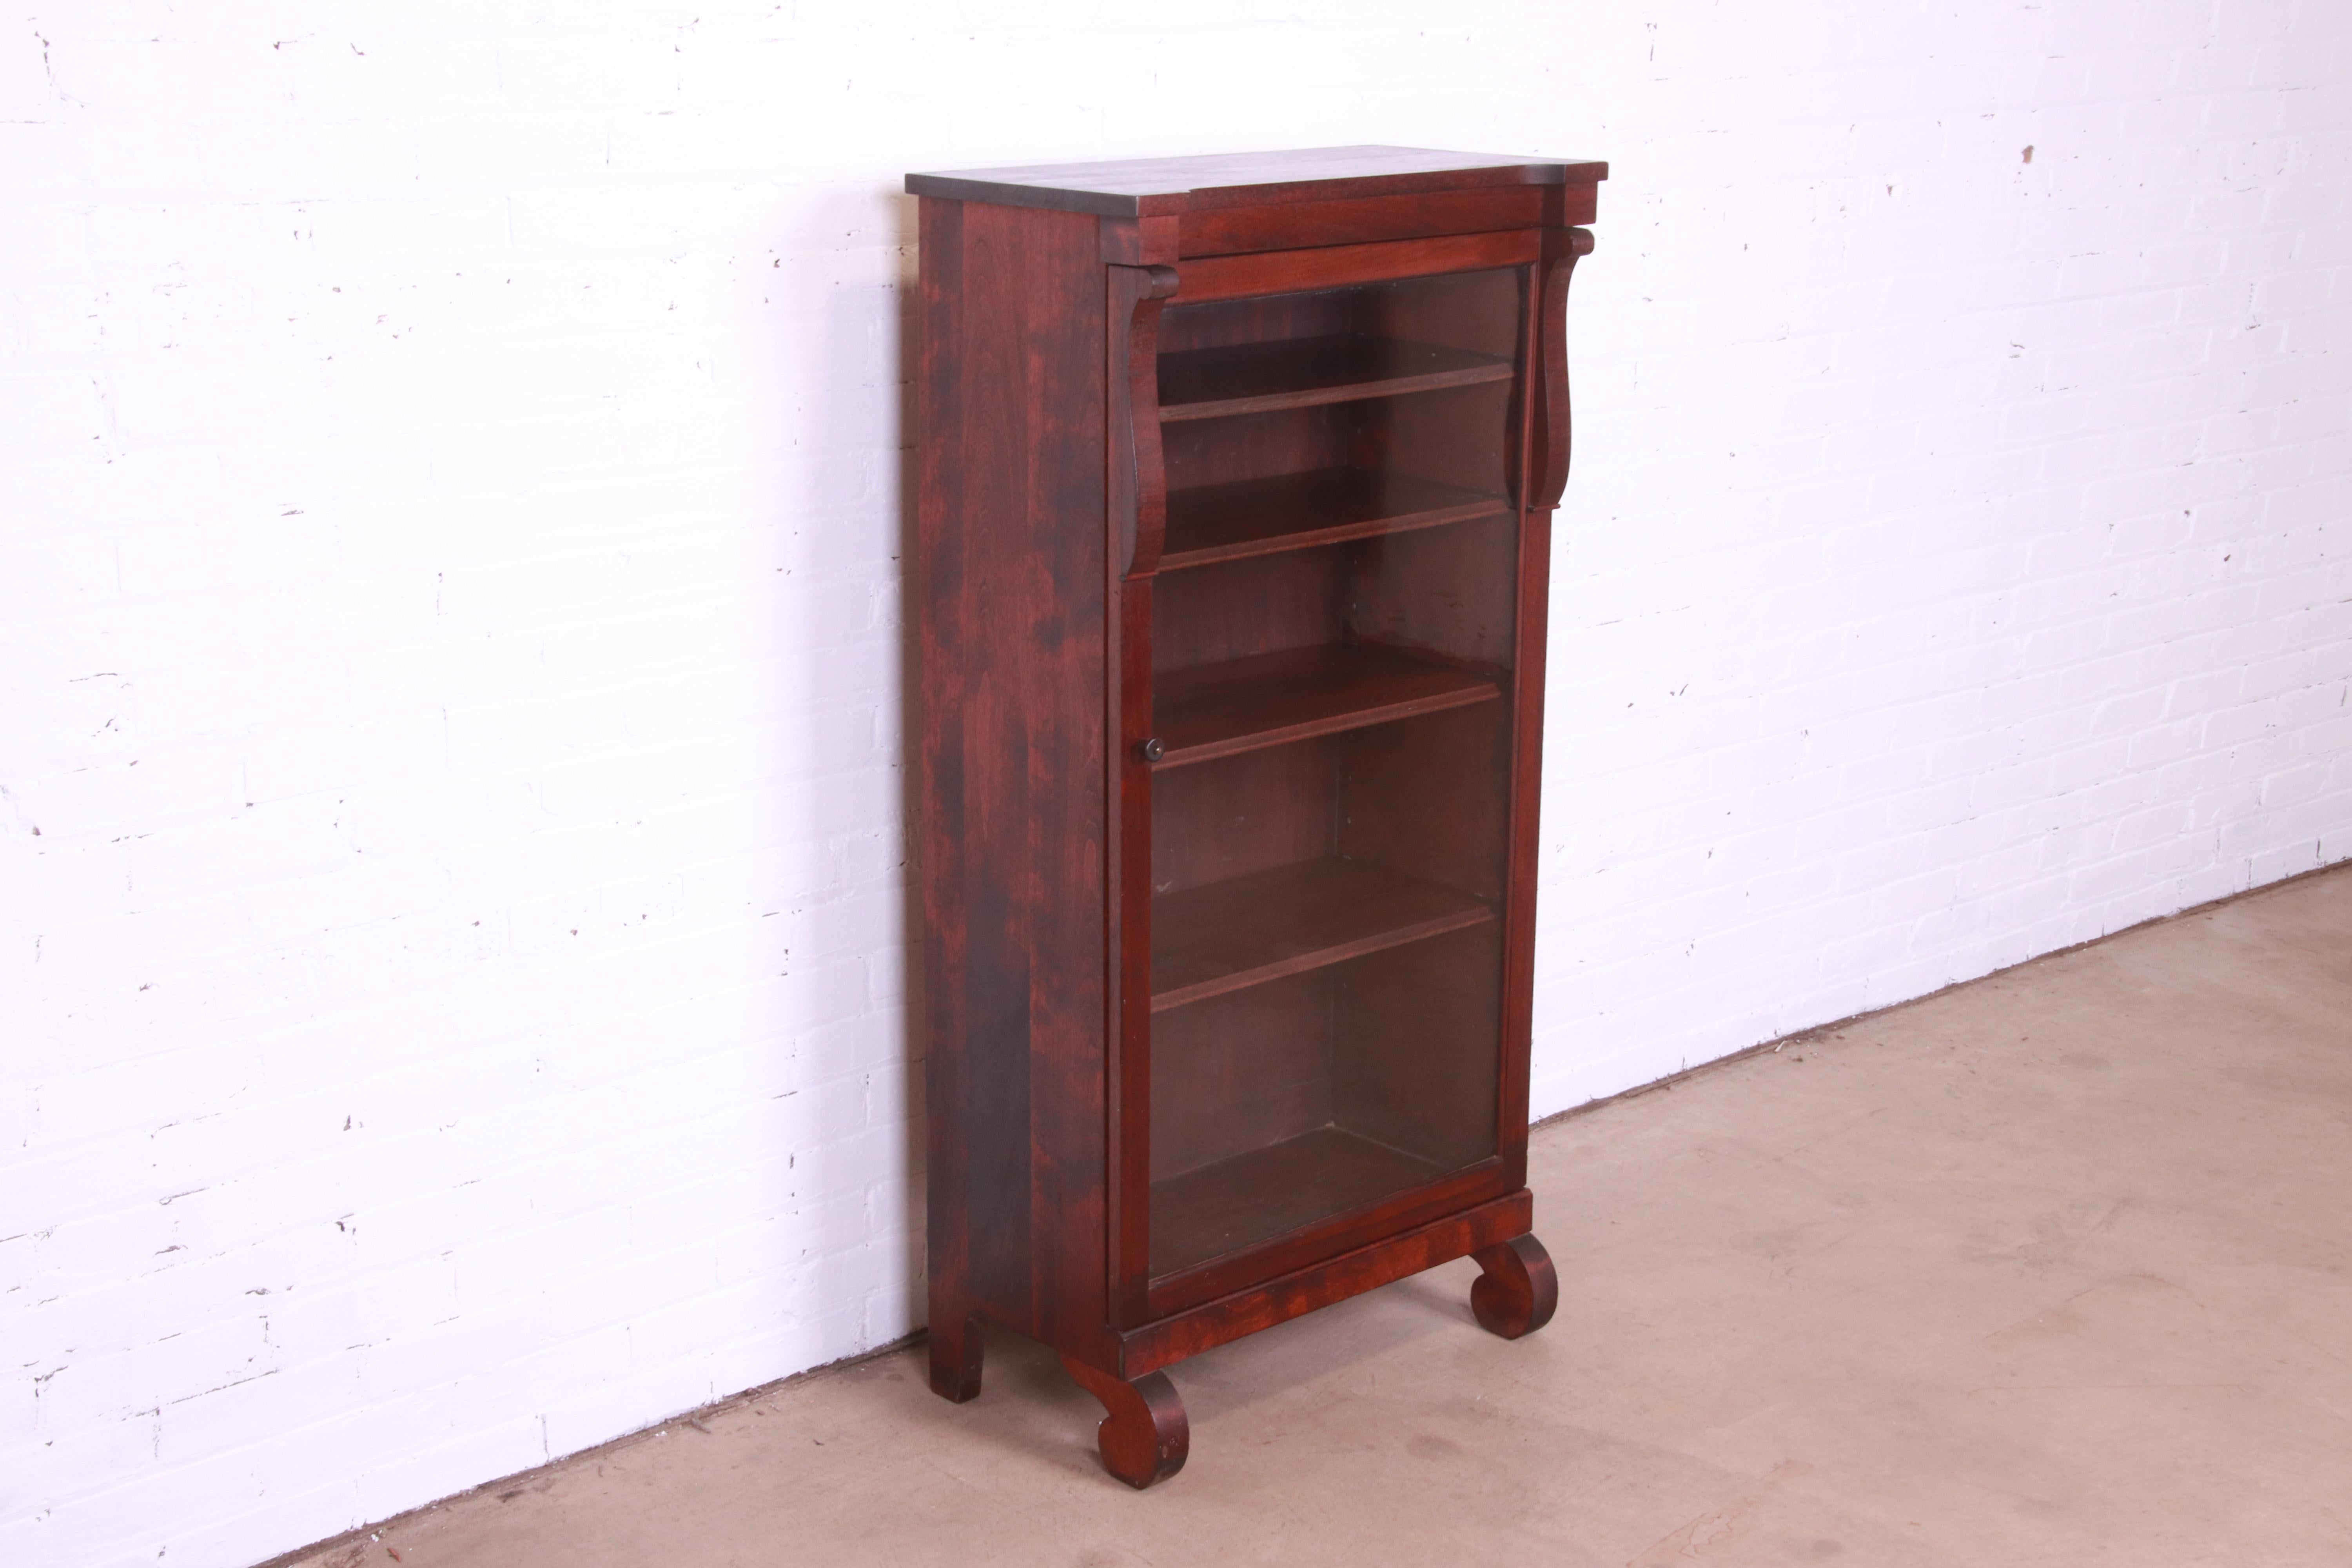 A beautiful antique Empire glass front bookcase cabinet

By Gimbel Brothers

USA, Circa 1900

Carved mahogany, with glass front door.

Measures: 26.25